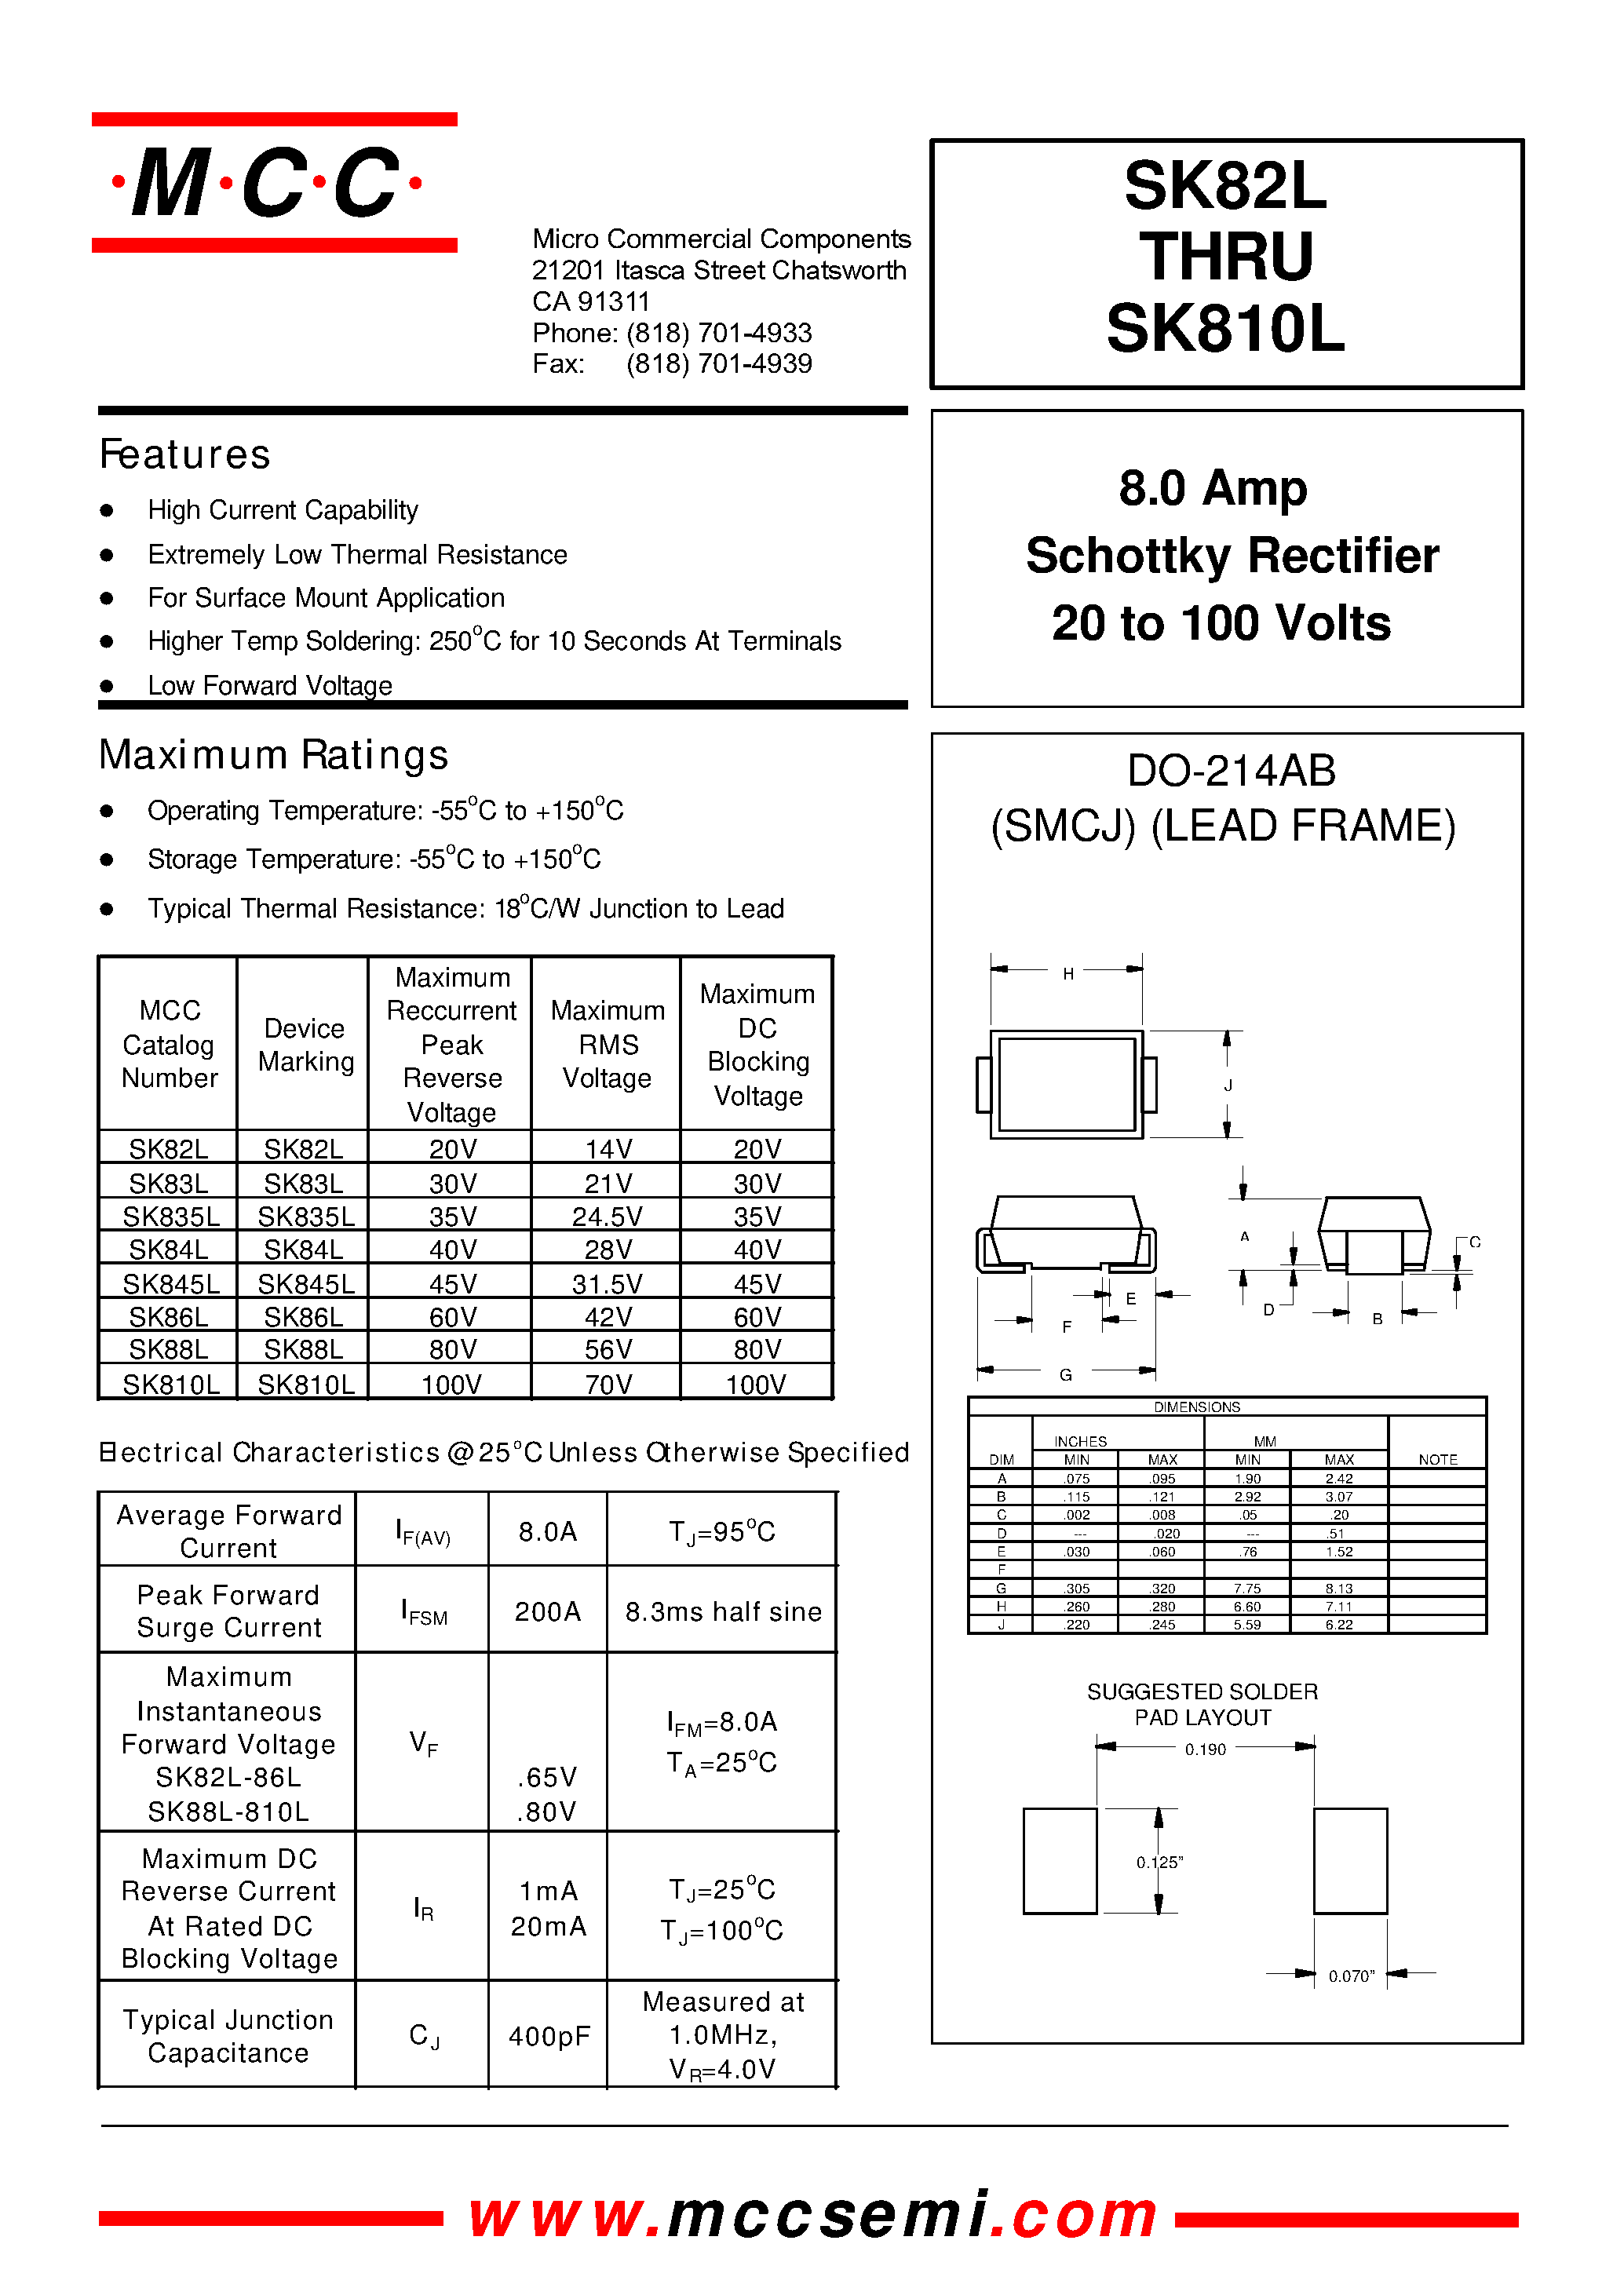 Datasheet SK82L - 8.0 Amp Schottky Rectifier 20 to 100 Volts page 1